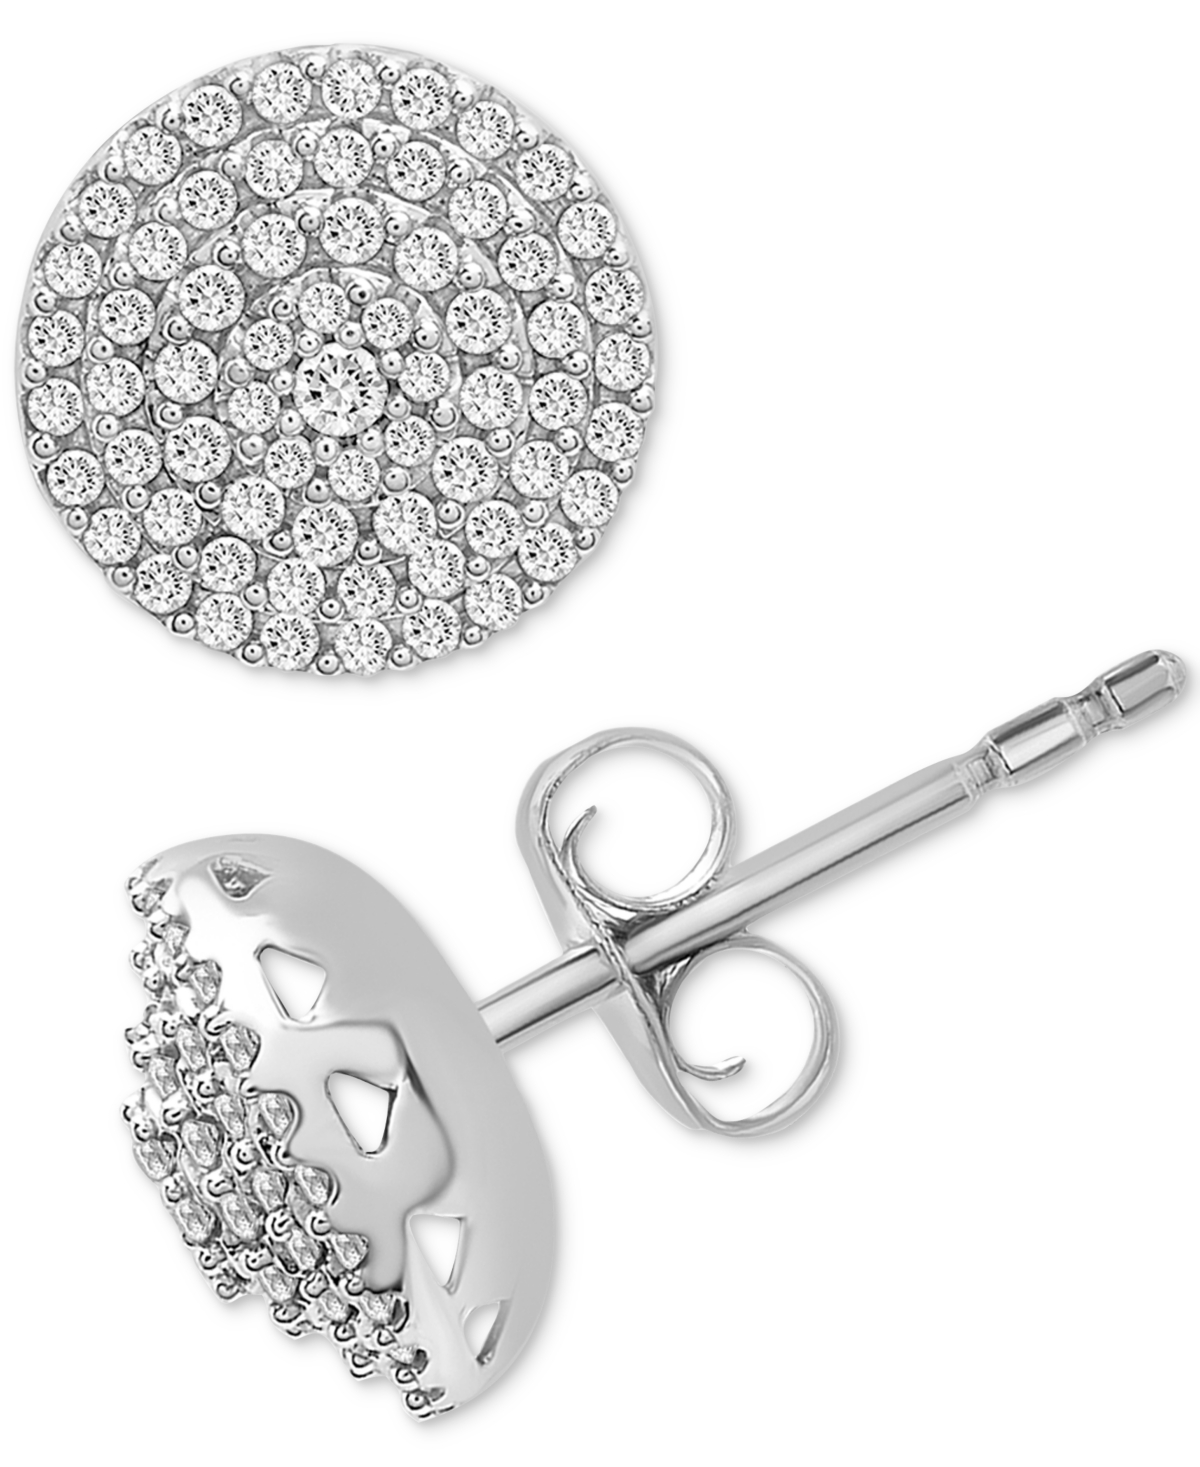 Diamond Circle Stud Earrings (1/2 ct. t.w.) in 14k White Gold, Created for Macy's - White Gold